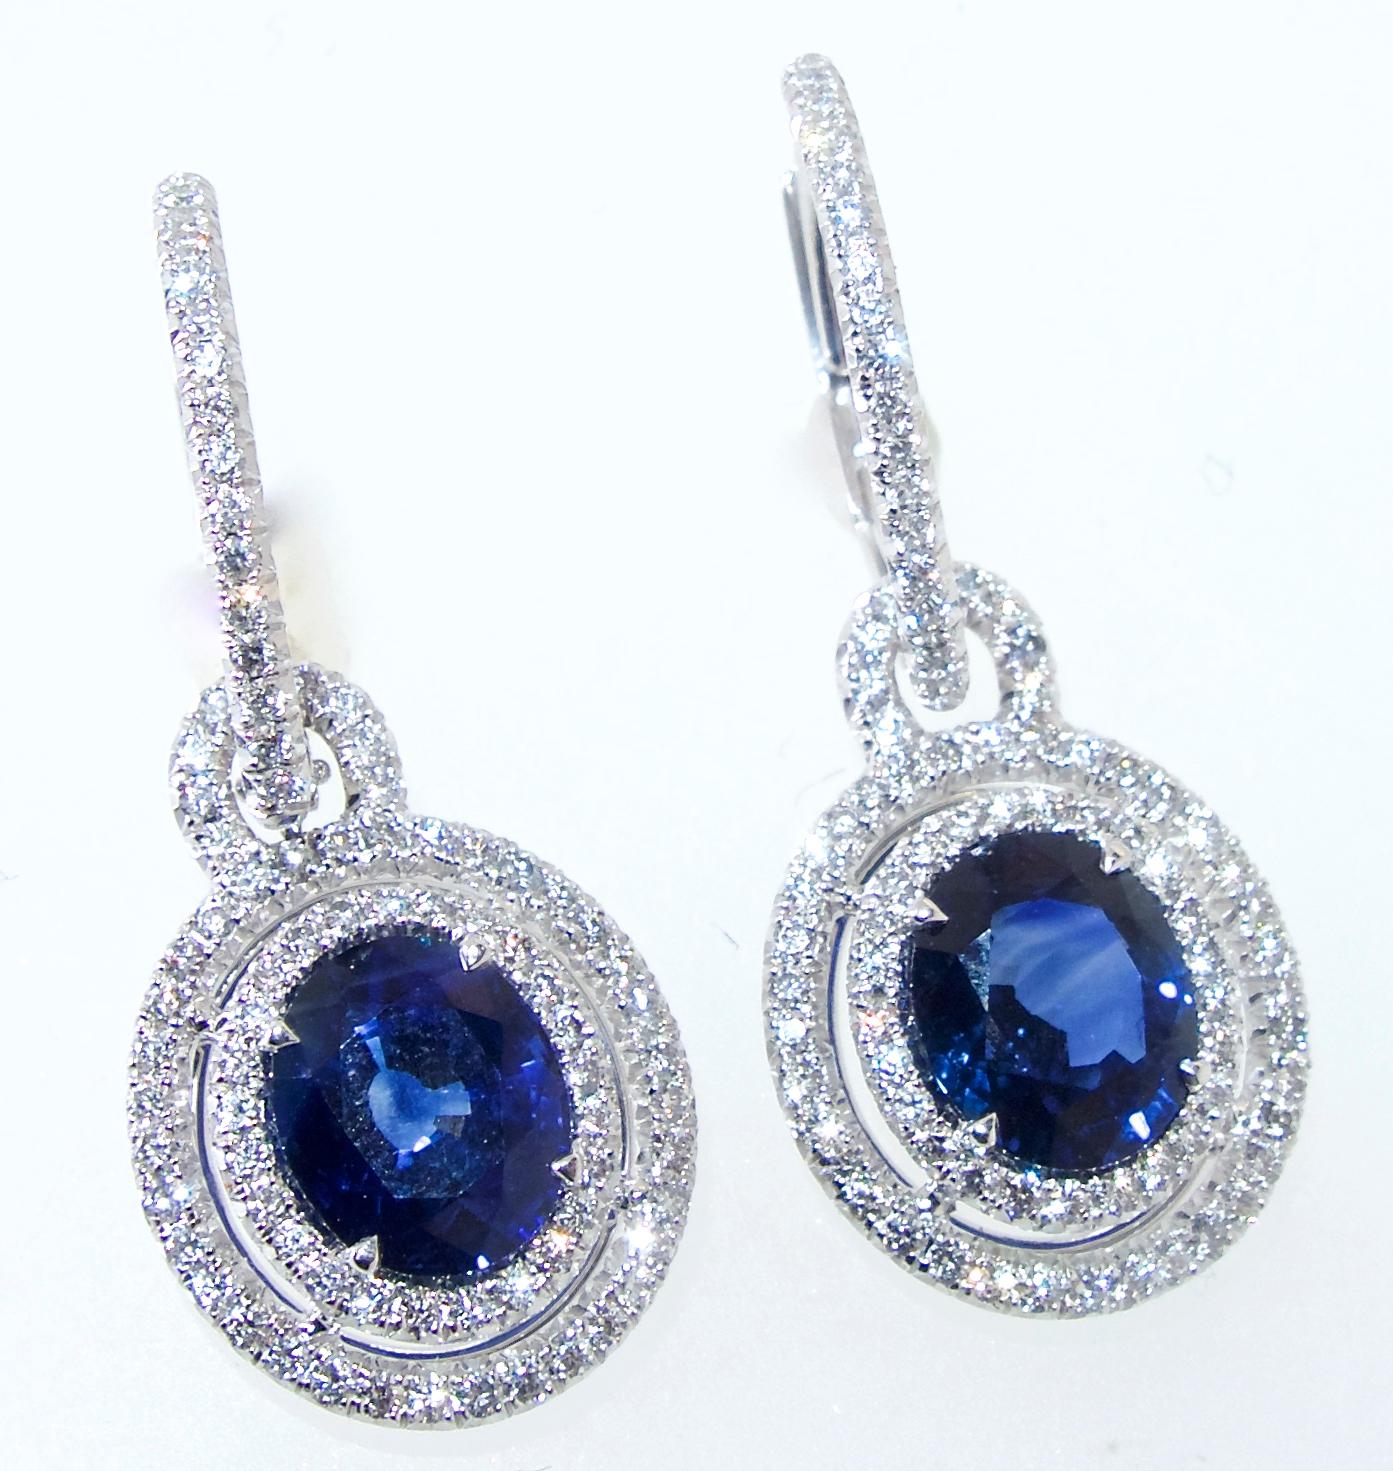 Contemporary Sapphire and Diamond Earrings, Pierre/Famille